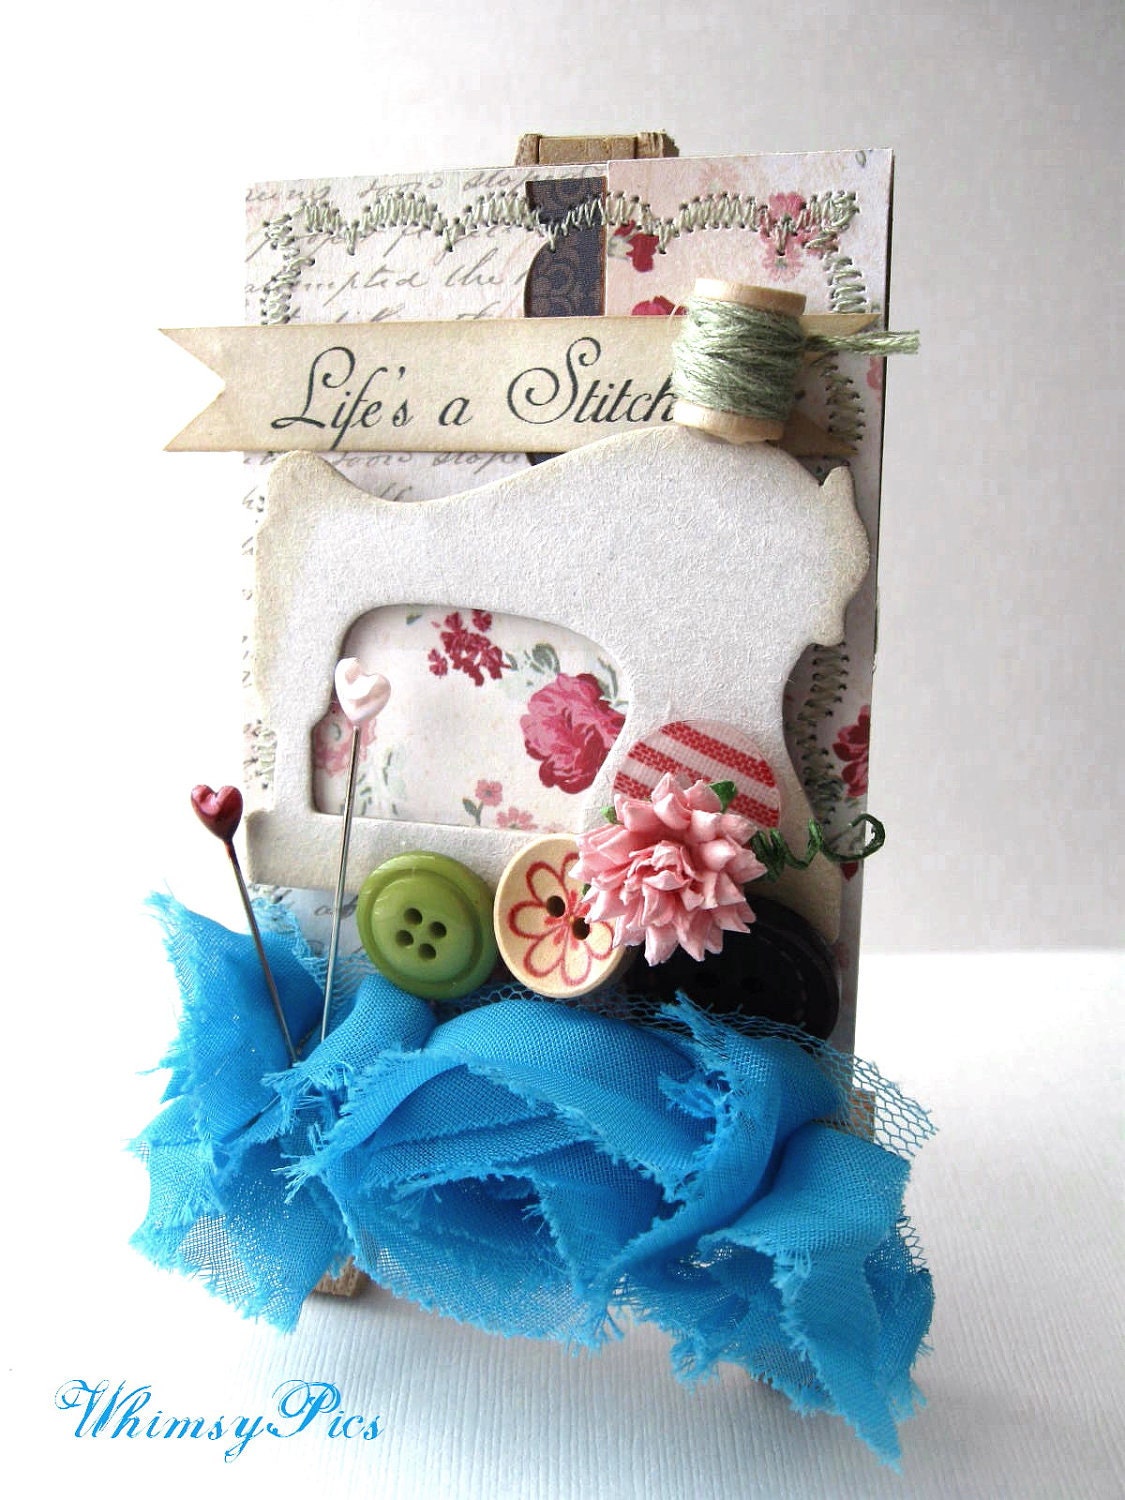 Vintage Inspired ACEO OOAK One of a Kind Life's a Stitch Mini Art Easel